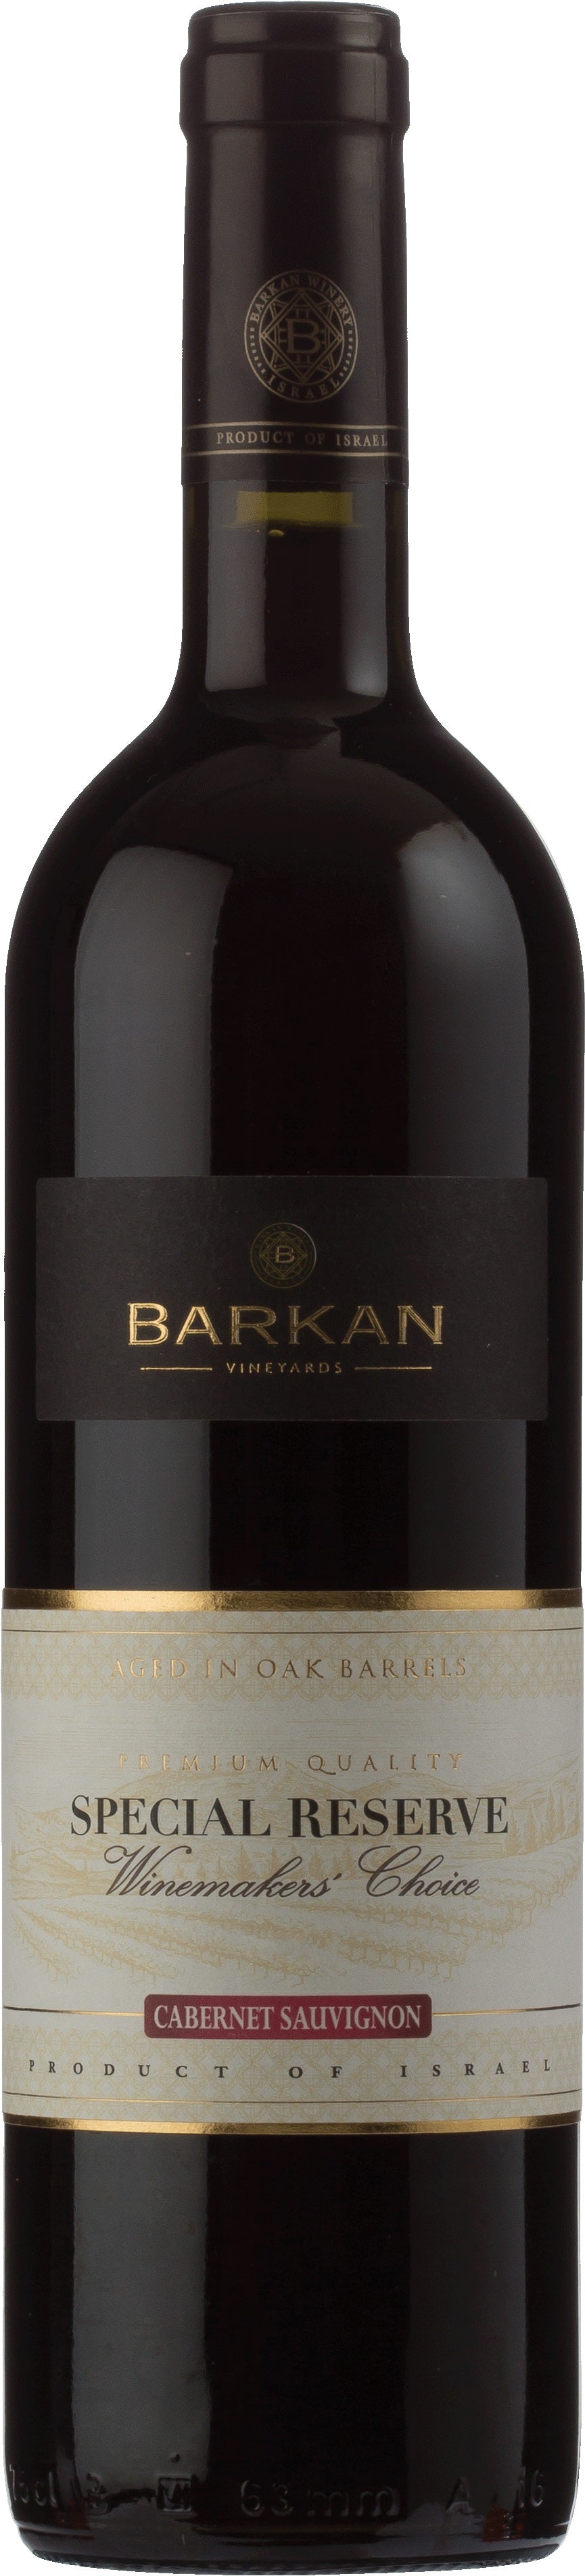 Barkan Cabernet Sauvignon Special Reserve Winemakers' Choice 2014